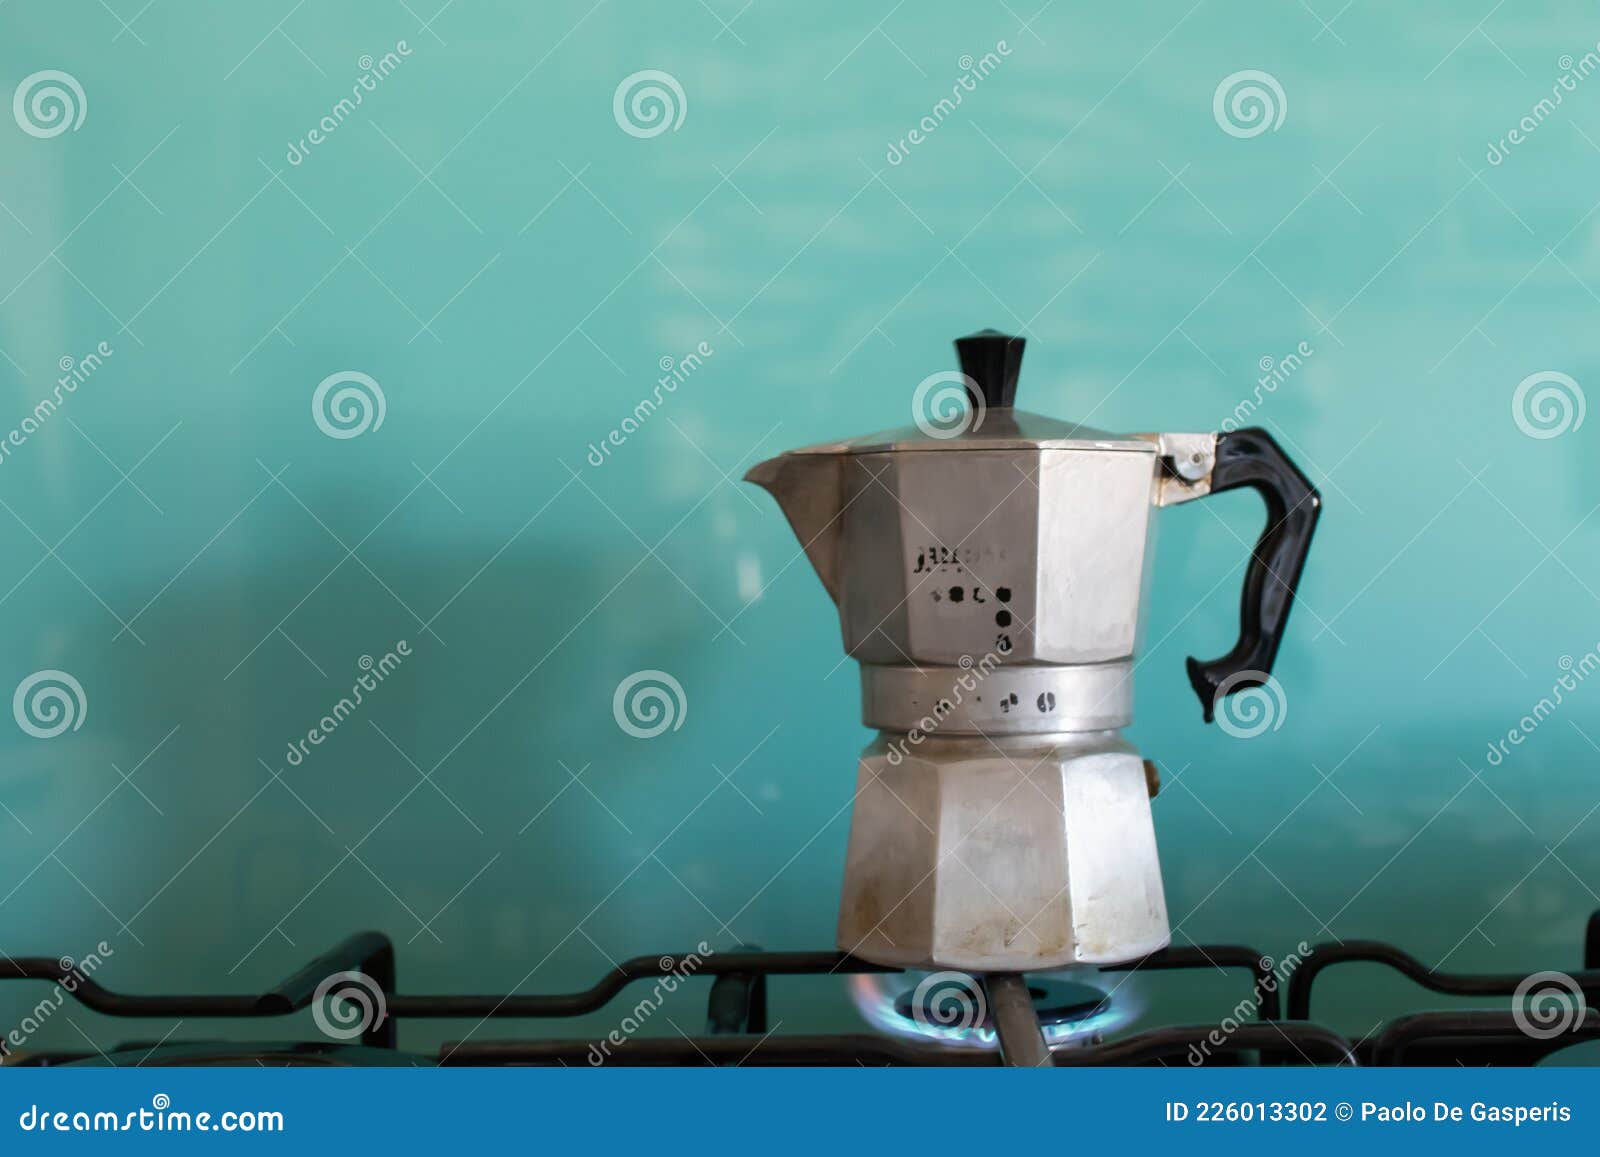 moka coffe on gas flame. italian typical coffee tool. espresso coffe with light blue background and copy space